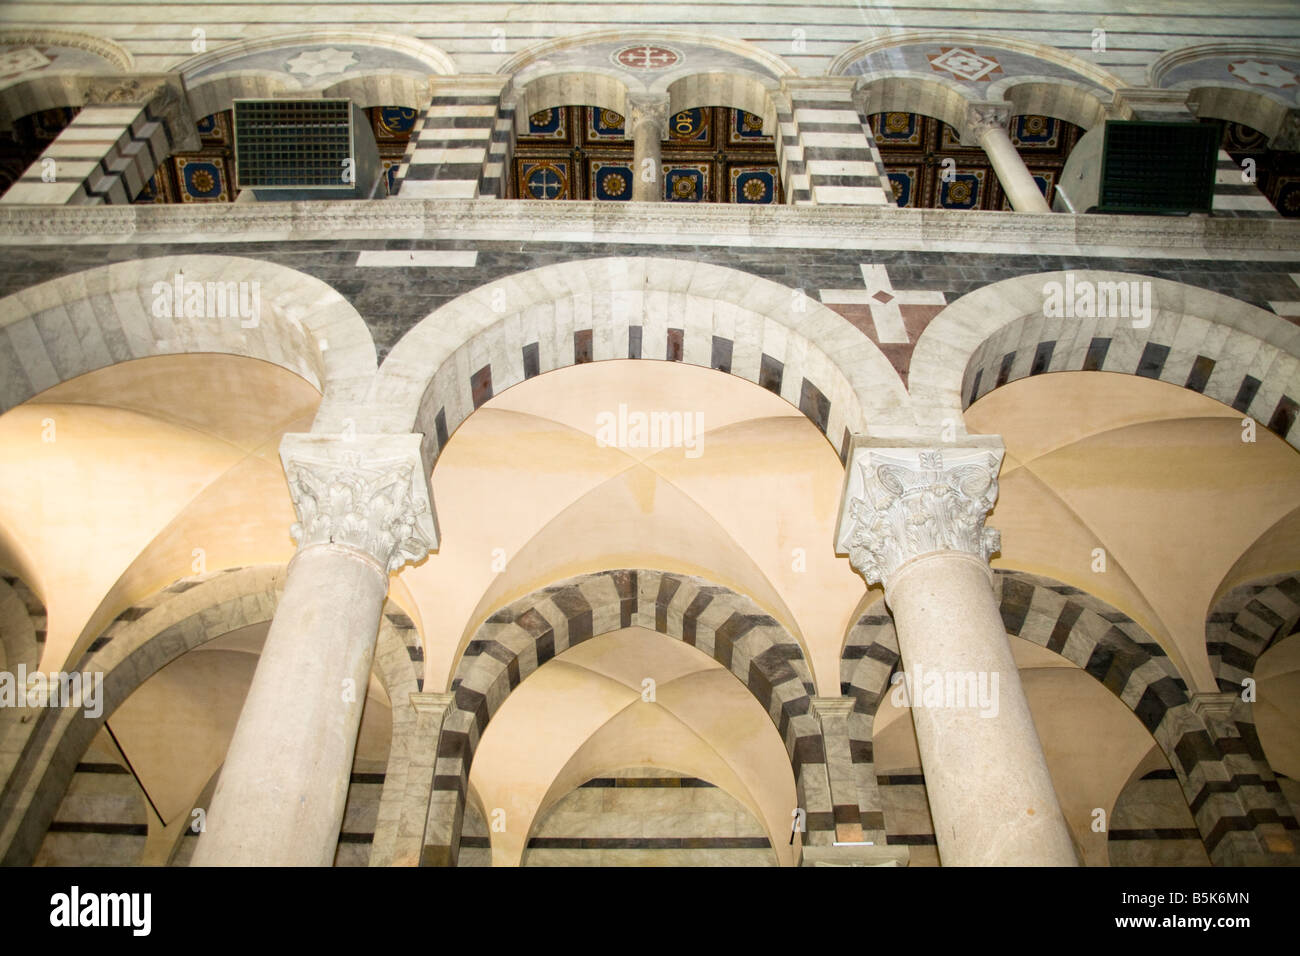 Arches and ceiling inside the cathedral, Piazza del Duomo, Pisa, Tuscany, Italy Stock Photo